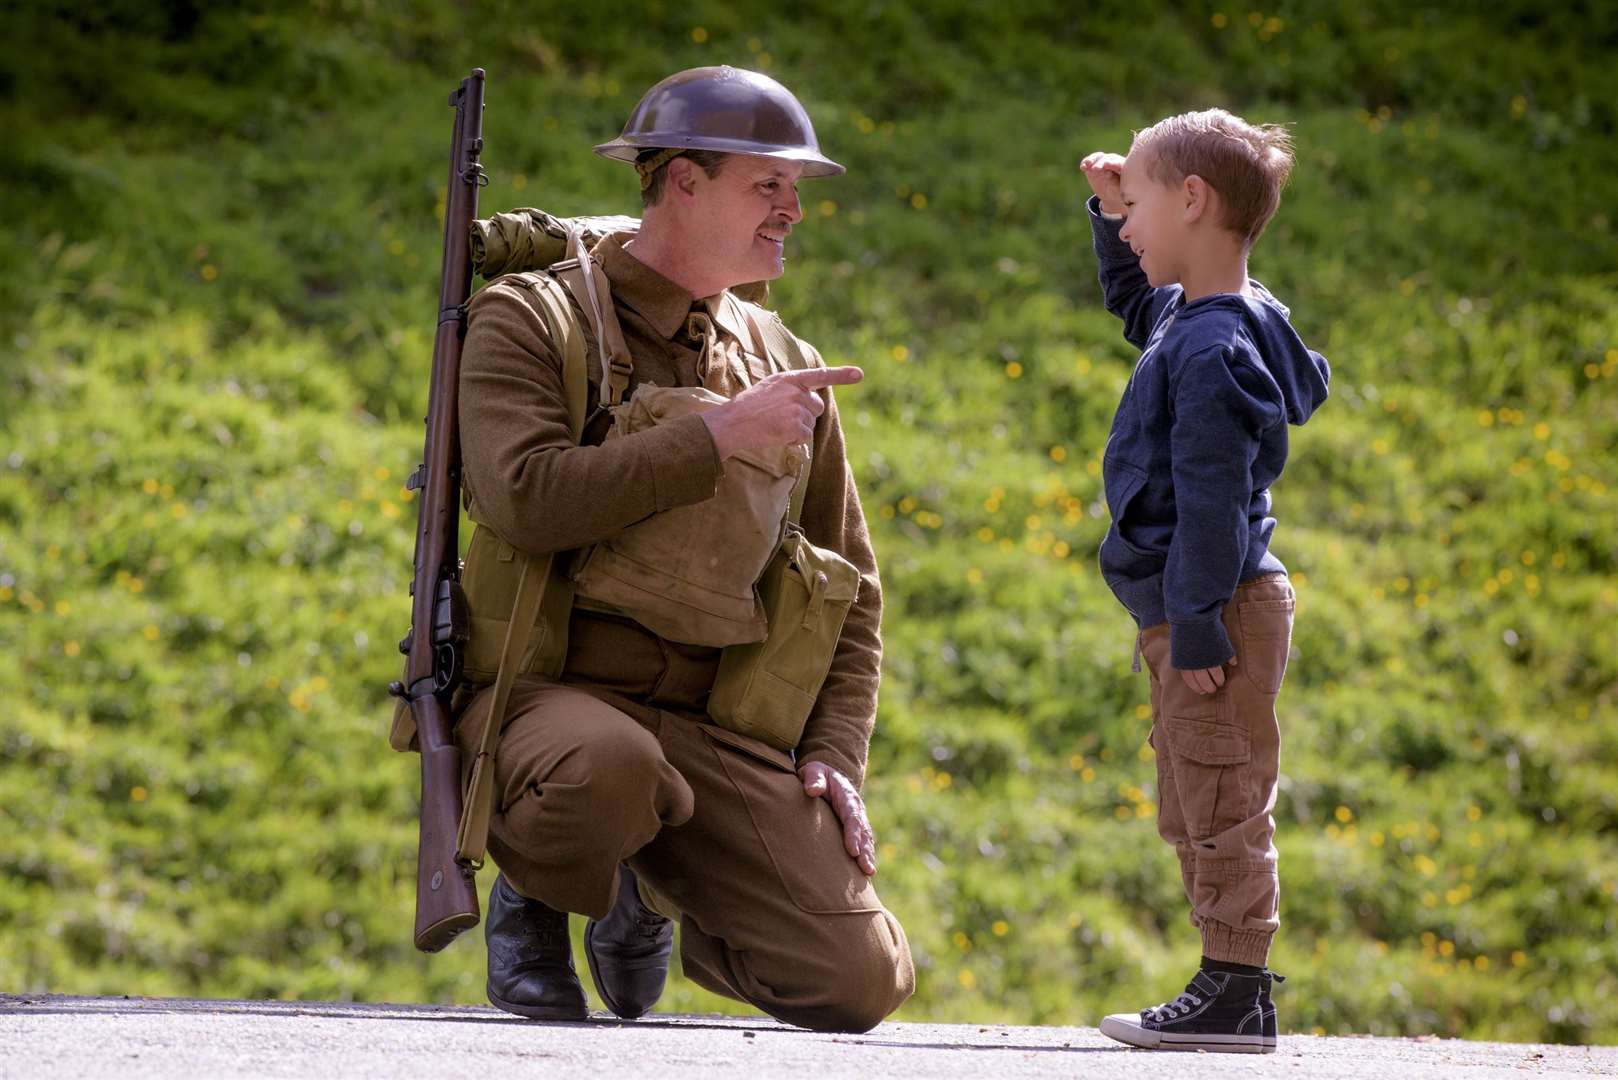 Don't miss the Wartime Weekends at Dover Castle